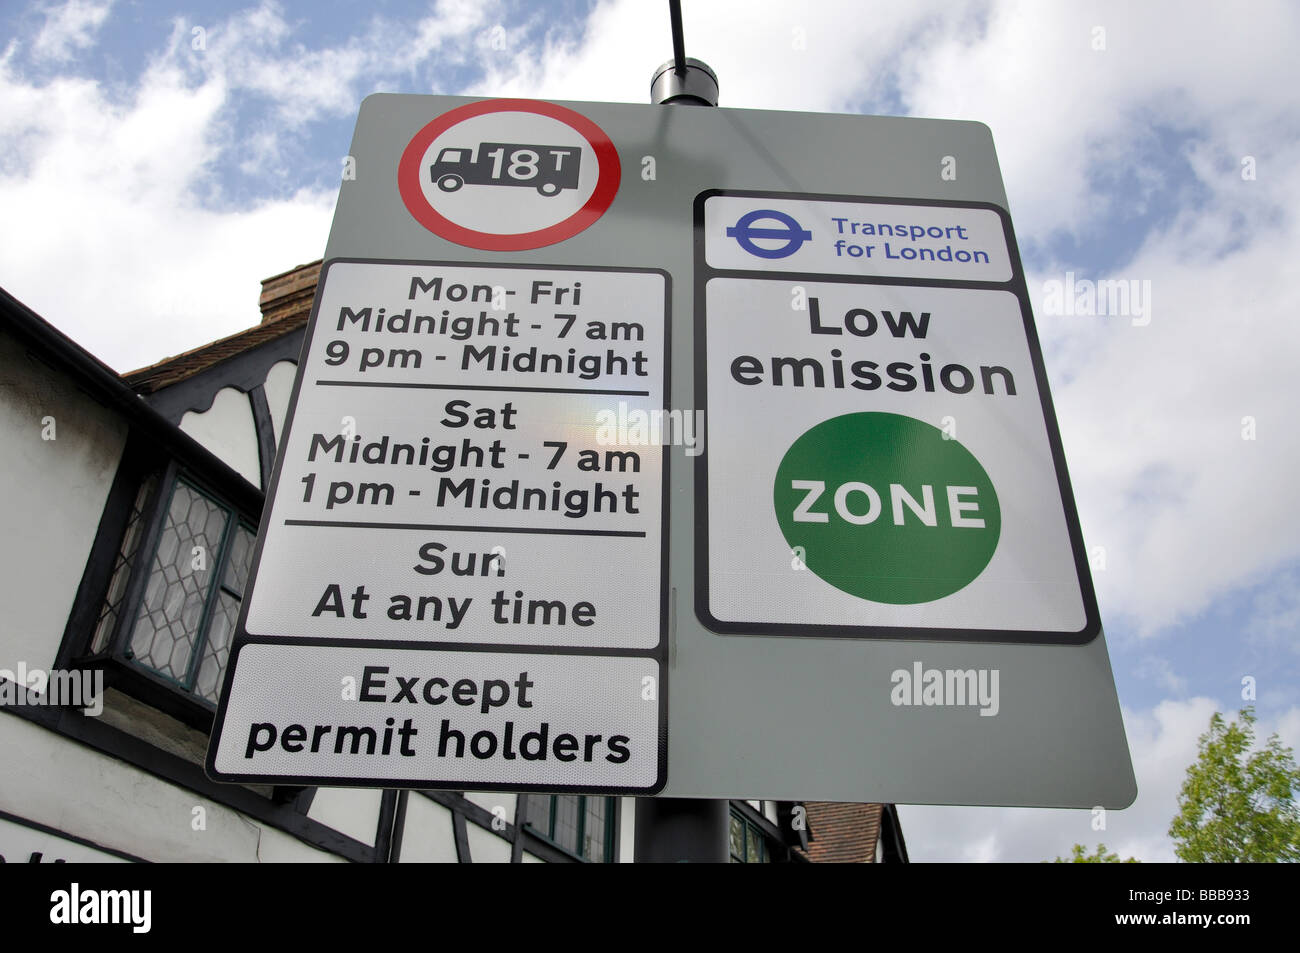 London Low emissions sign, Cheam, Greater London, England, United Kingdom Stock Photo